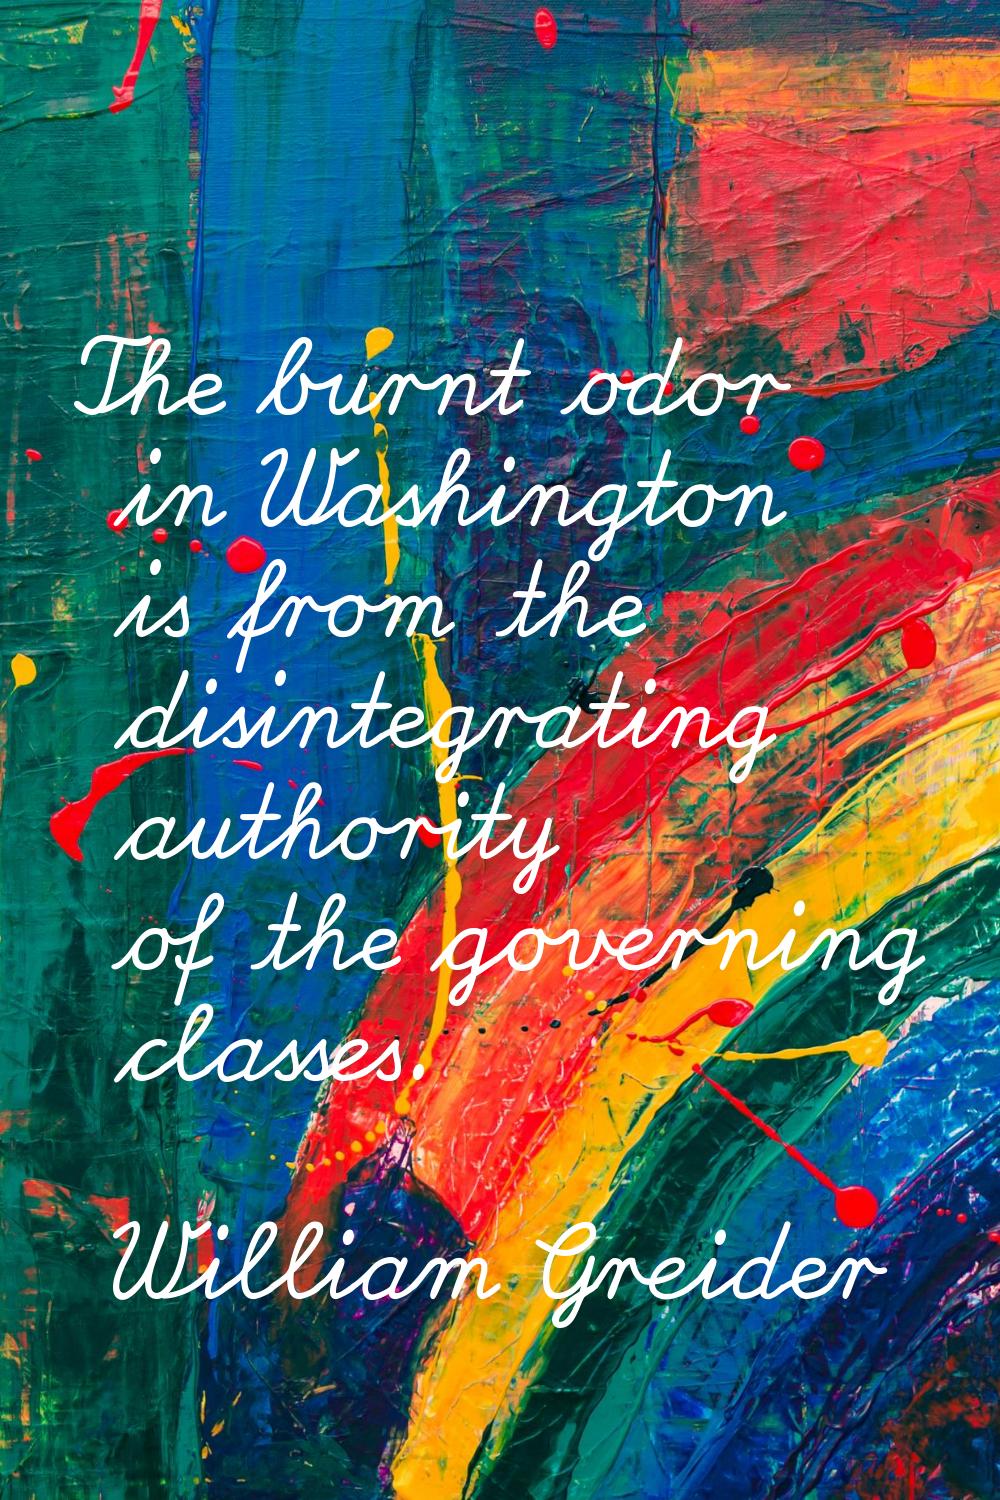 The burnt odor in Washington is from the disintegrating authority of the governing classes.